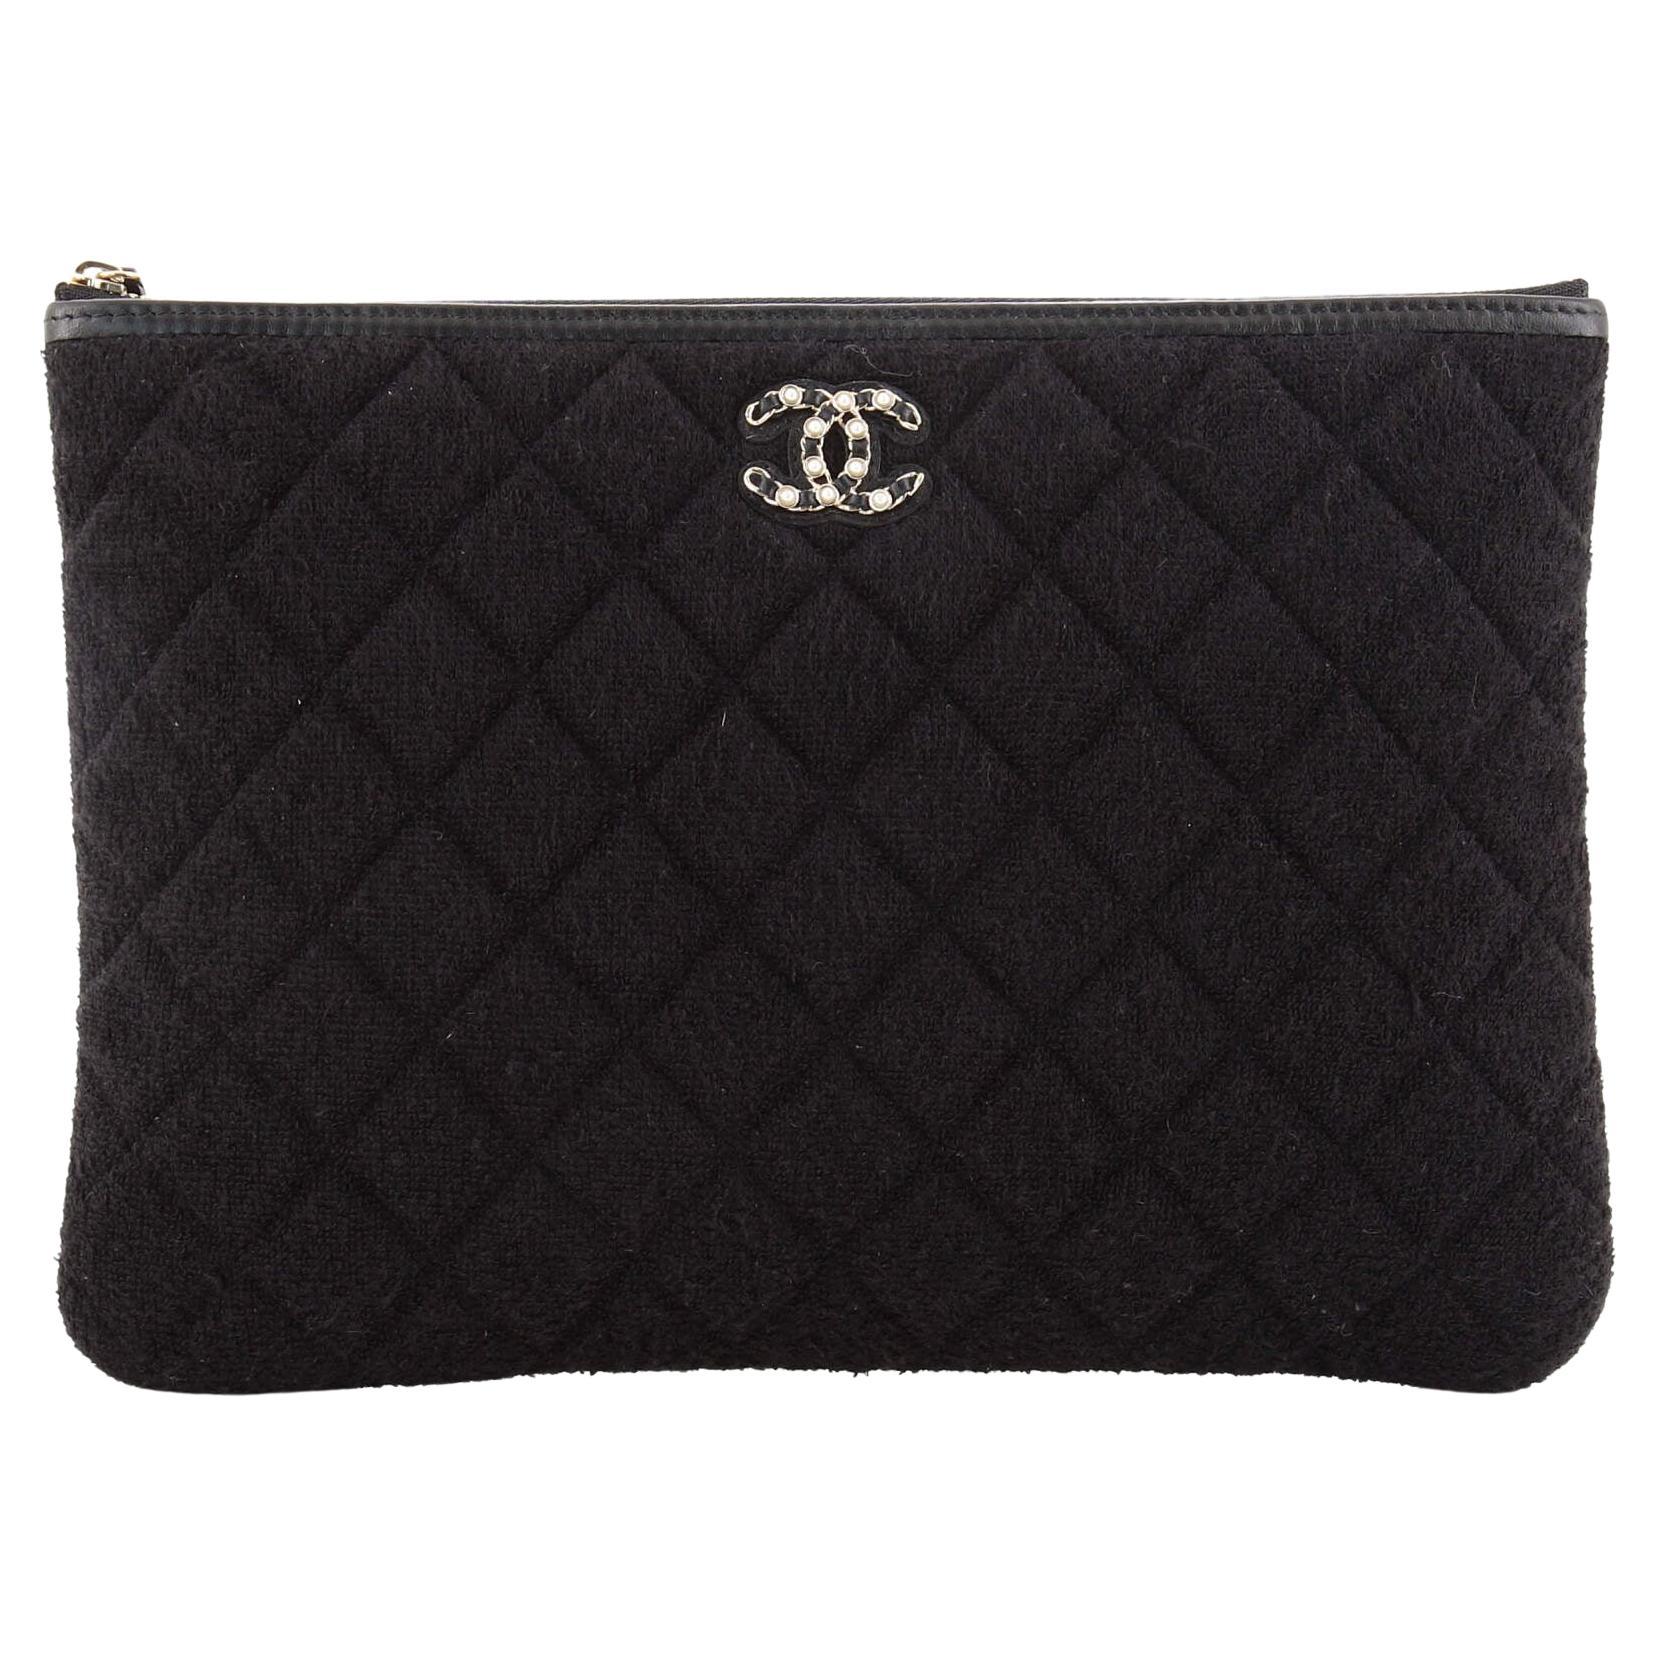 Chanel O Case Clutch Quilted Terry Cloth with Faux Pearls Medium